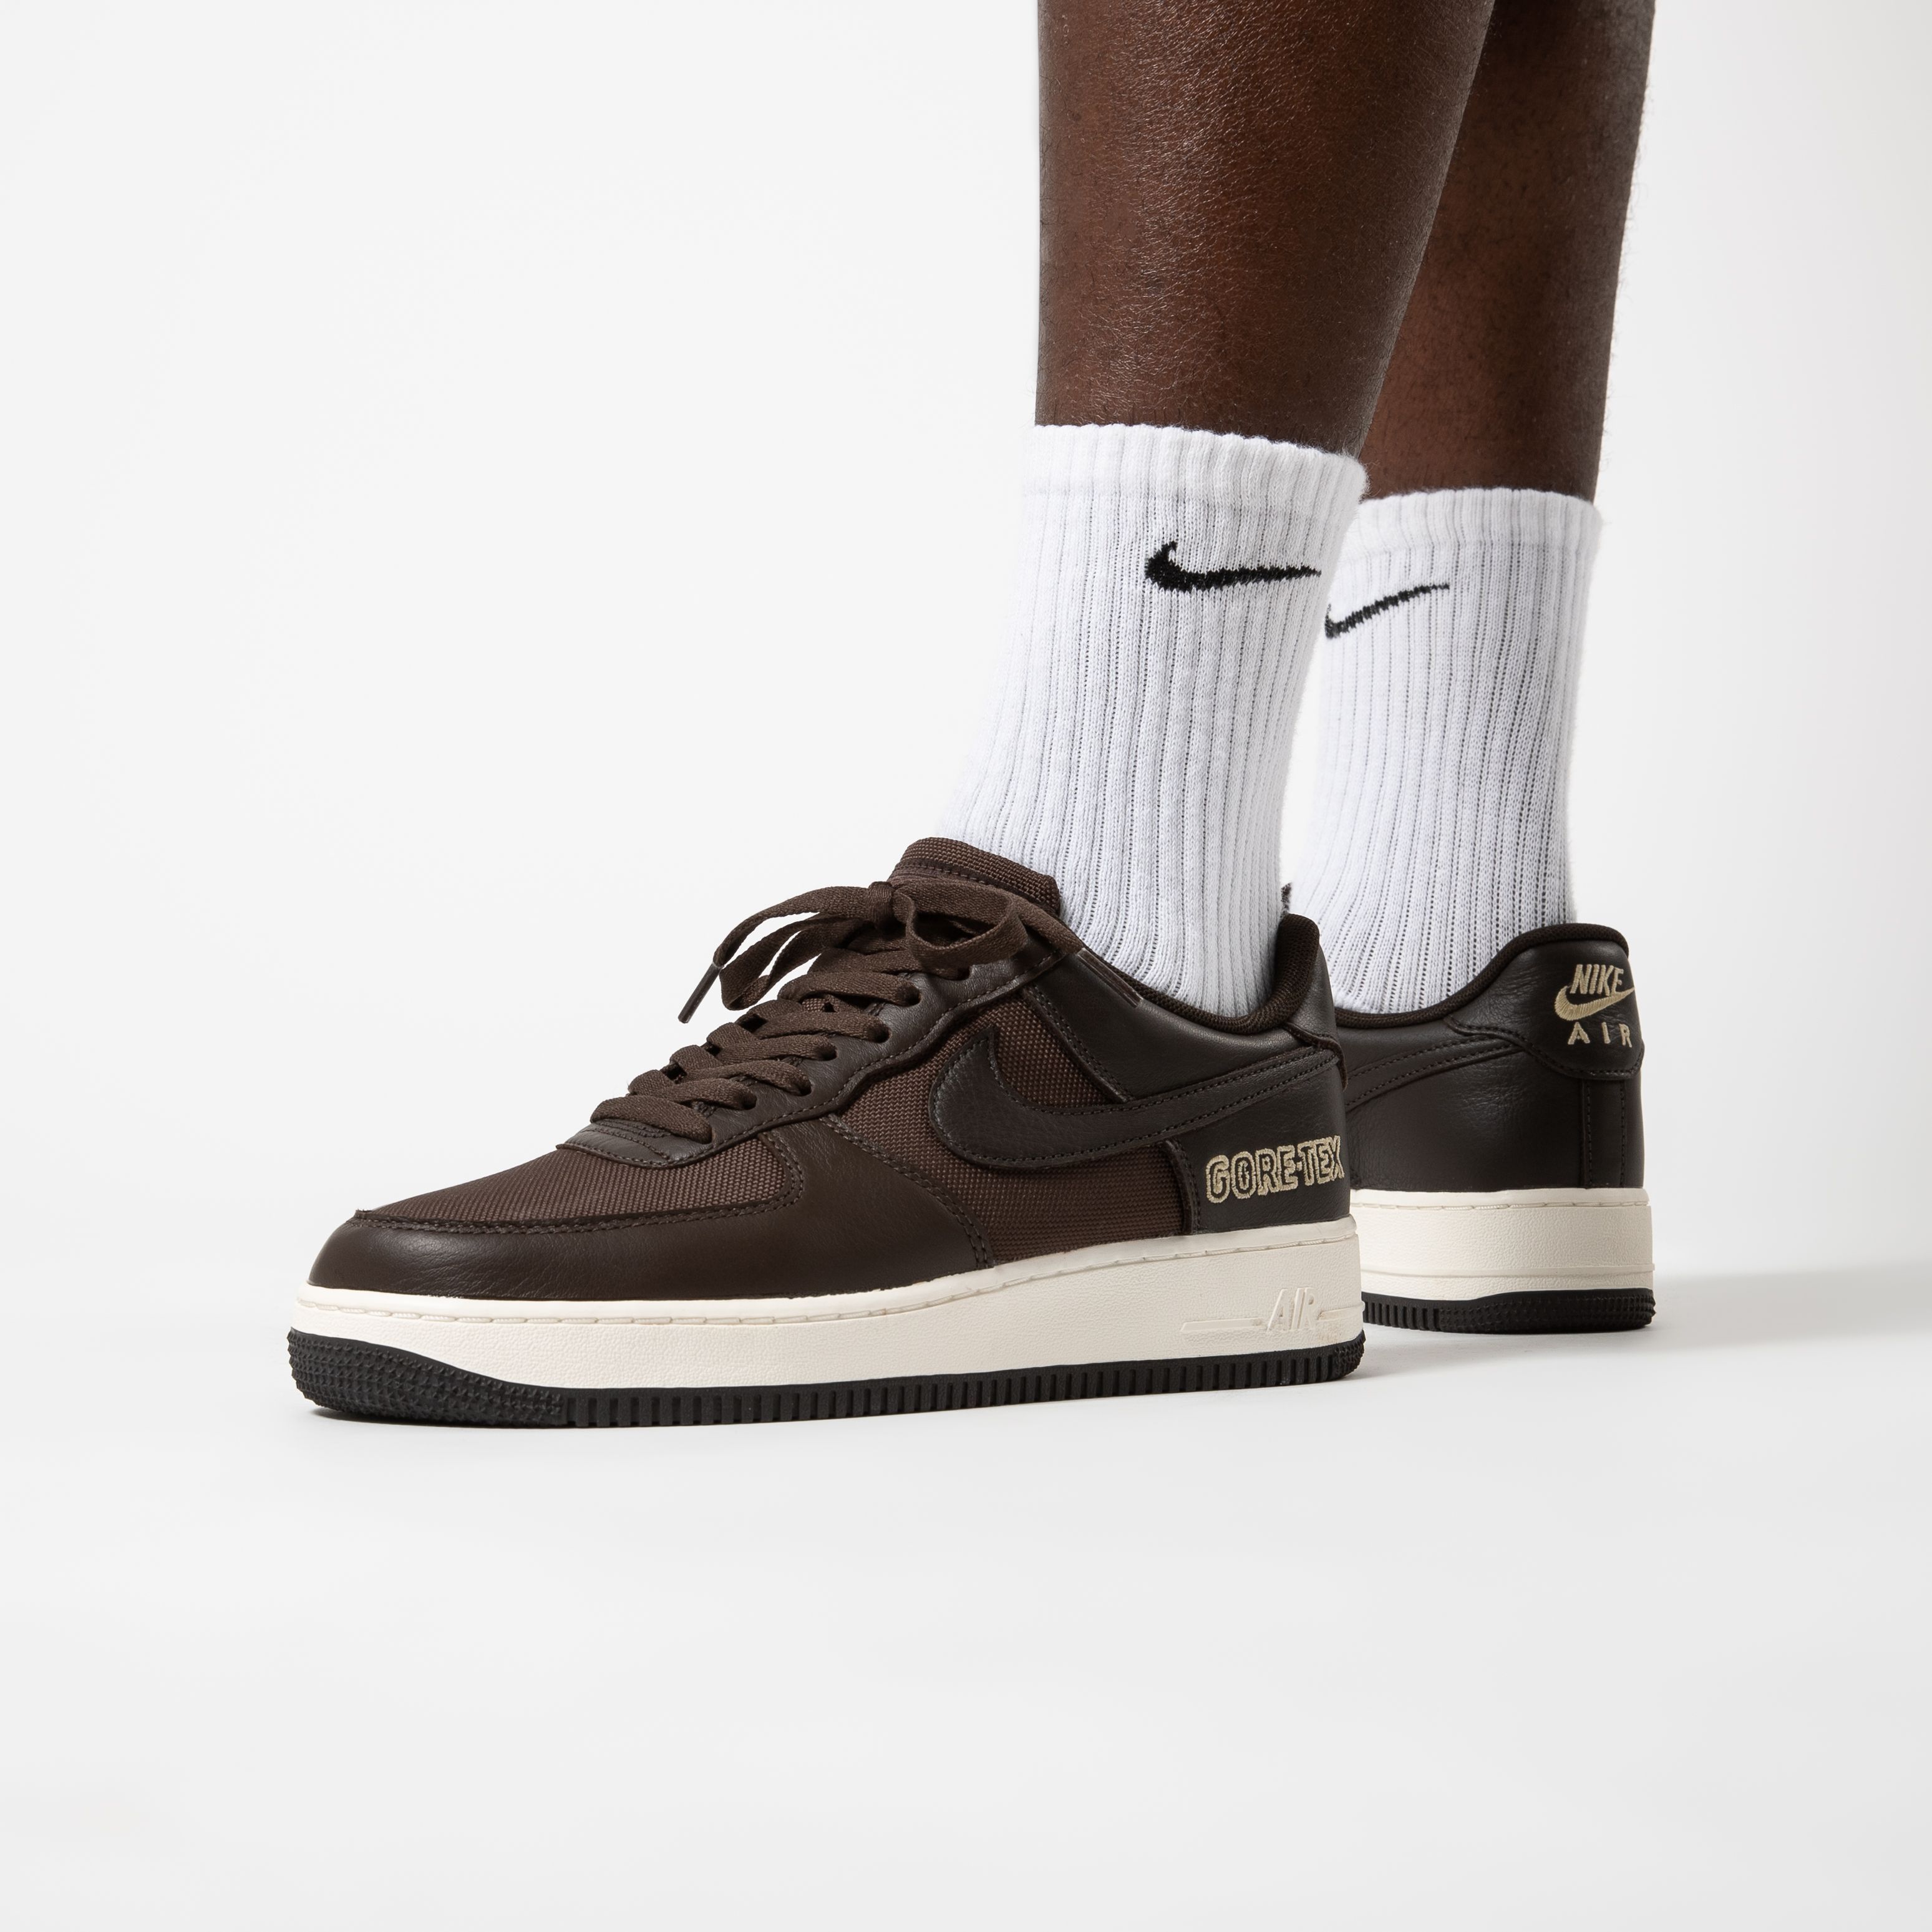 exposición pasado web Titolo on Twitter: "NEW 💫 Nike Air Force 1 Gore-Tex "Baroque Brown" click  ➡️ https://t.co/WvRSPOpOsw ⁠ US 7 (40) - US 12 (46)⁠ 🔎 CT2858-201⁠ ⁠ # titolo⁠ #titoloSHOP⁠ #nike #goretex #af1 #airforce1 #